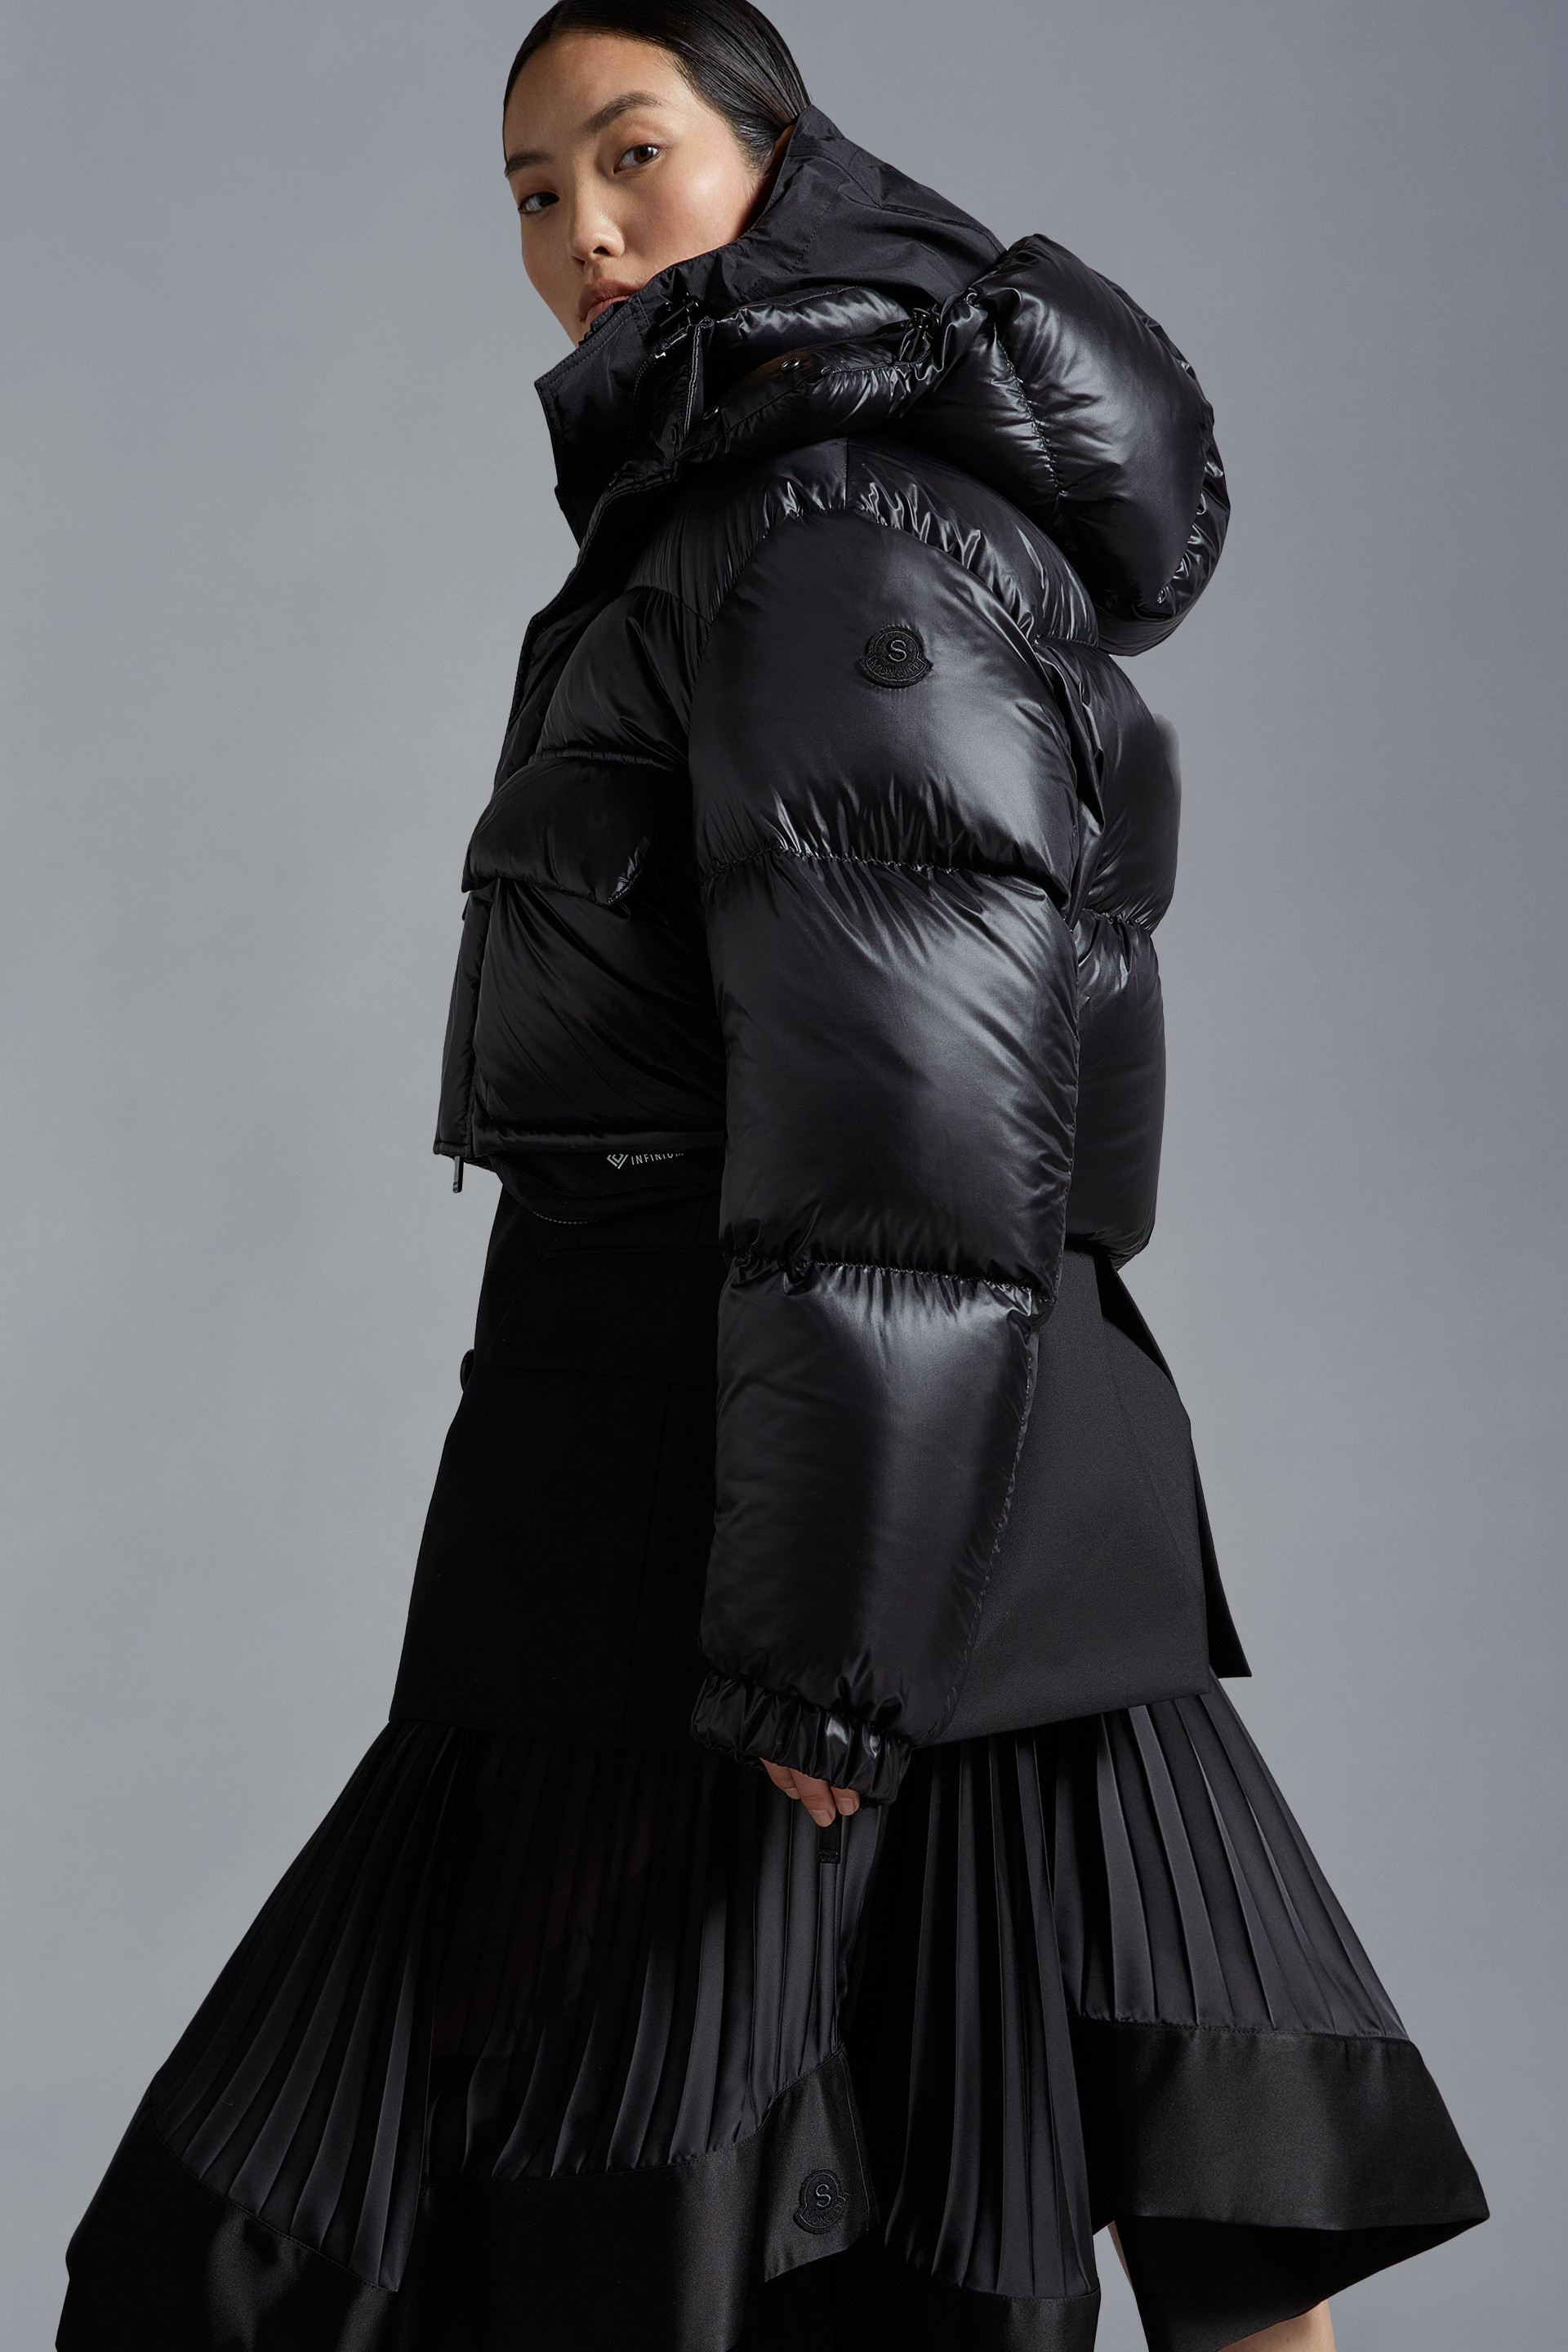 For Special Projects - Moncler x Sacai | Moncler US